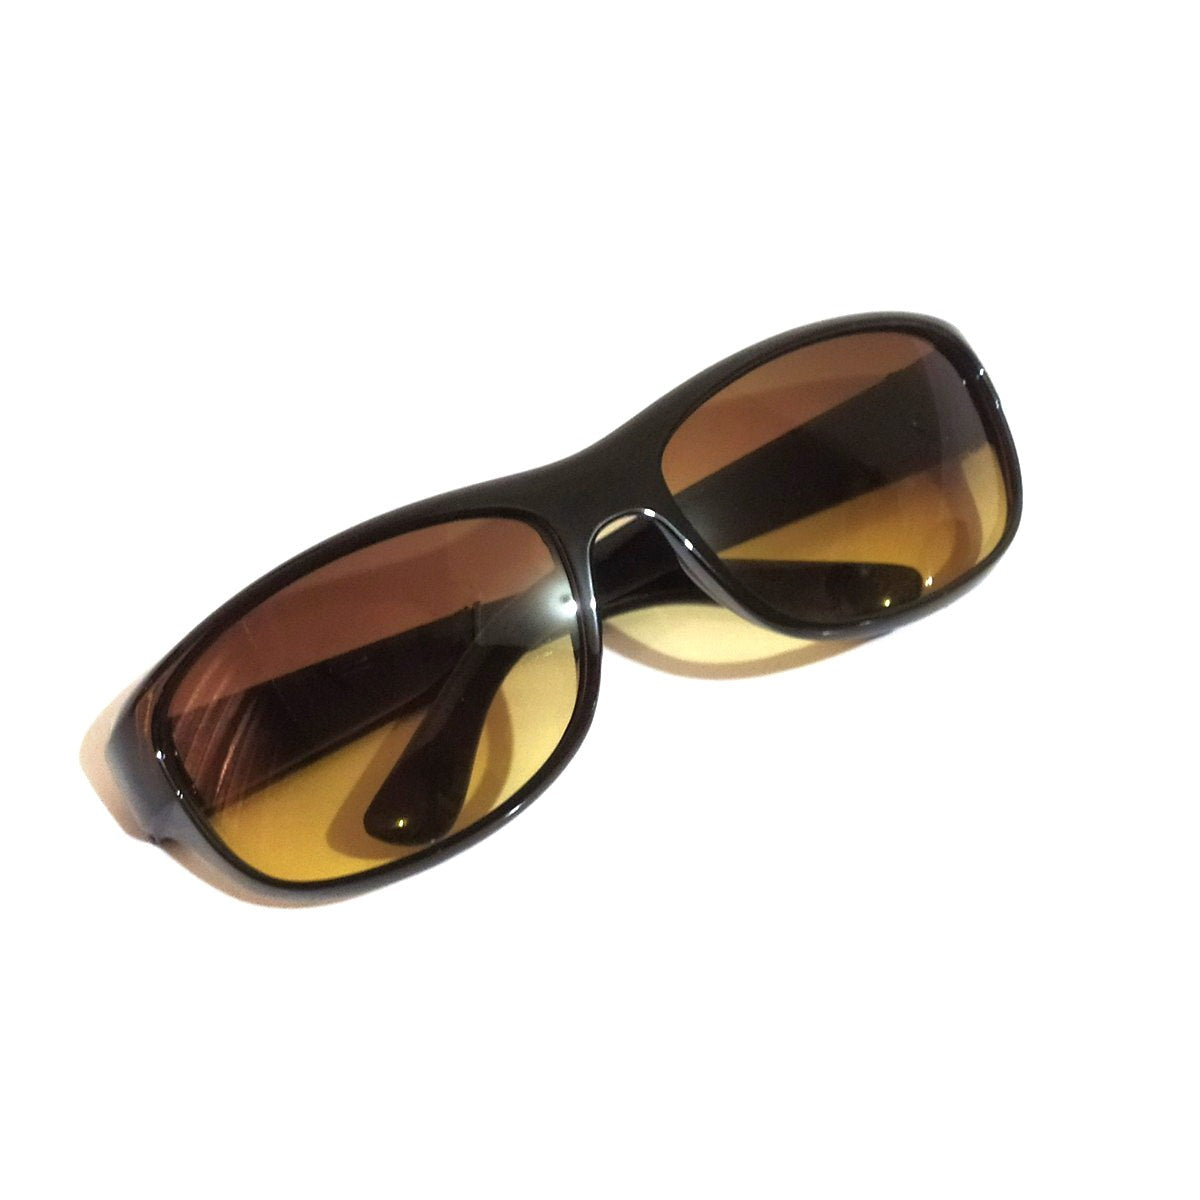 EYESafety Driving Glasses for Men and Women Sunglasses with Brown Lens M05 - Glasses India Online